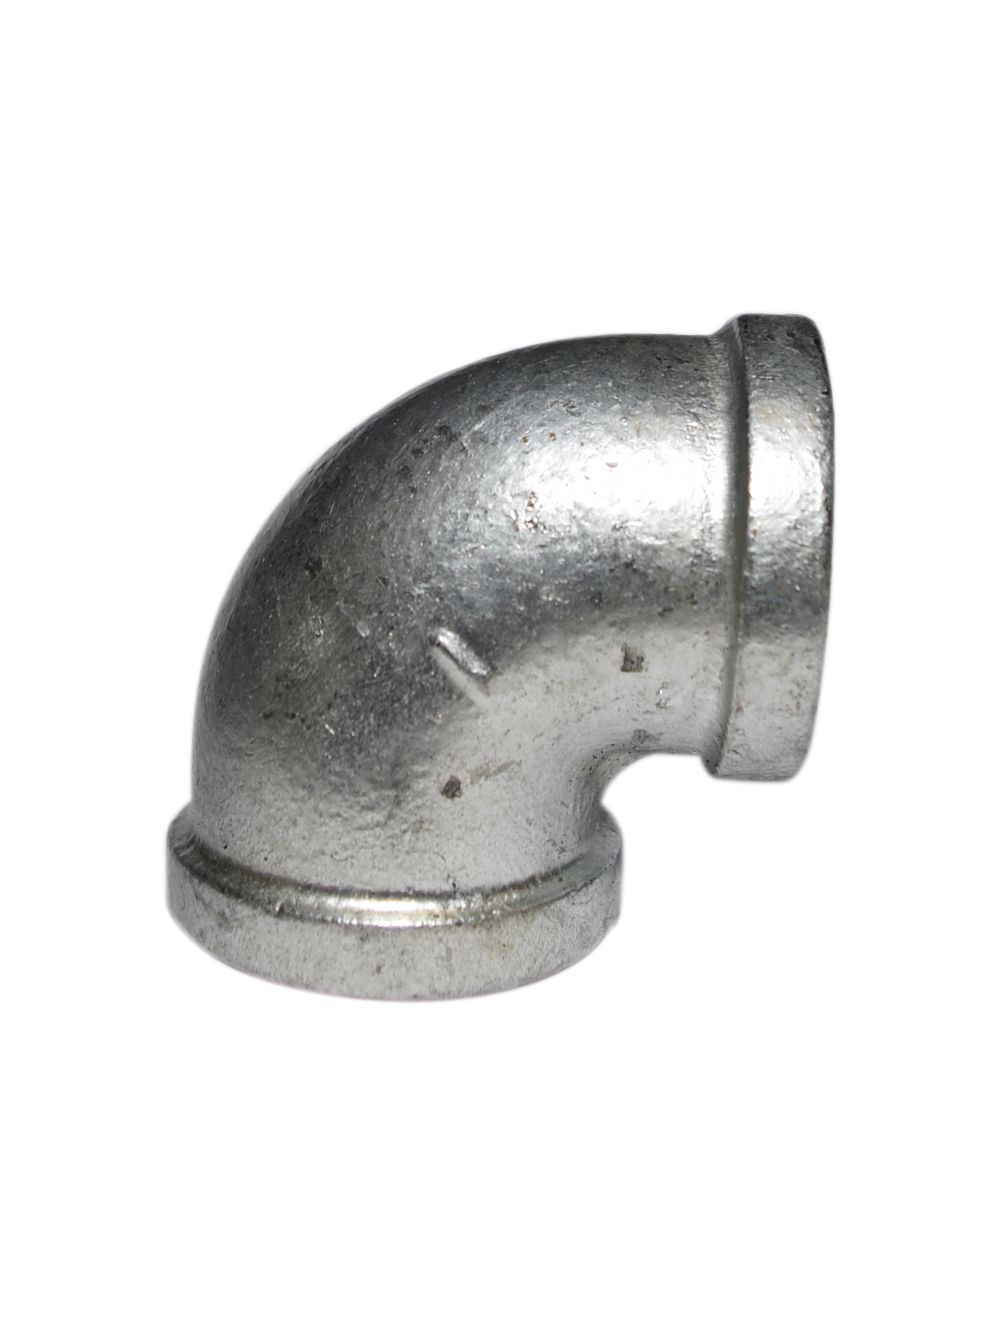 1/2" INCH BSP Malleable Galvanised Iron F x F 90 Degree Elbow 